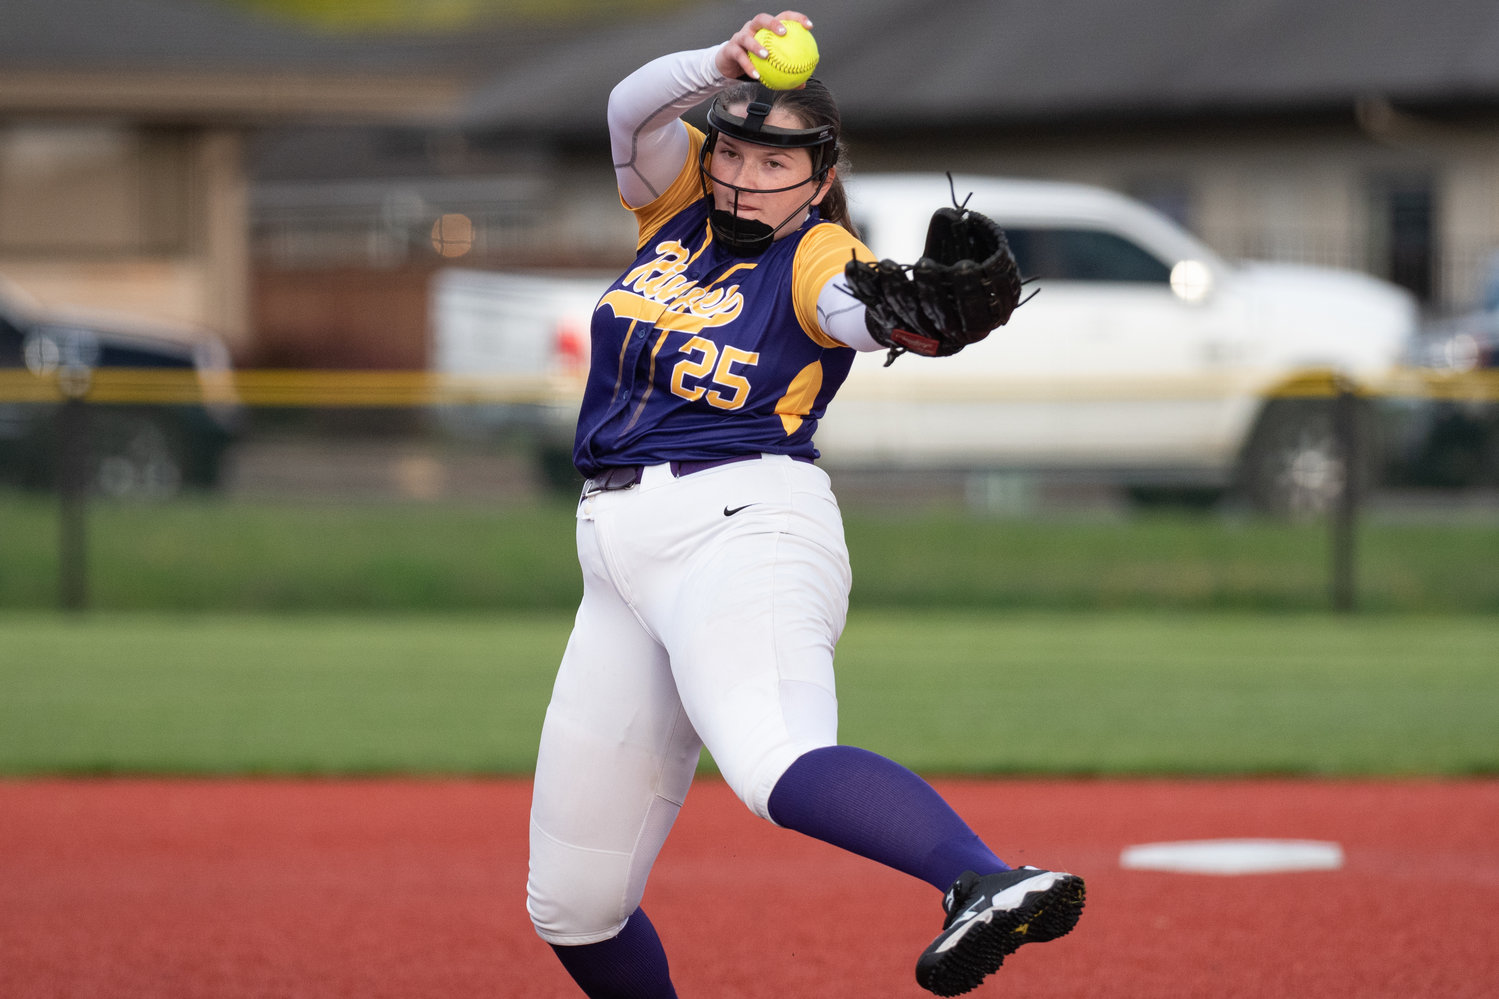 A Columbia River player throws a pitch against Aberdeen in the 2A District 4 tournament at Recreation Park May 19.